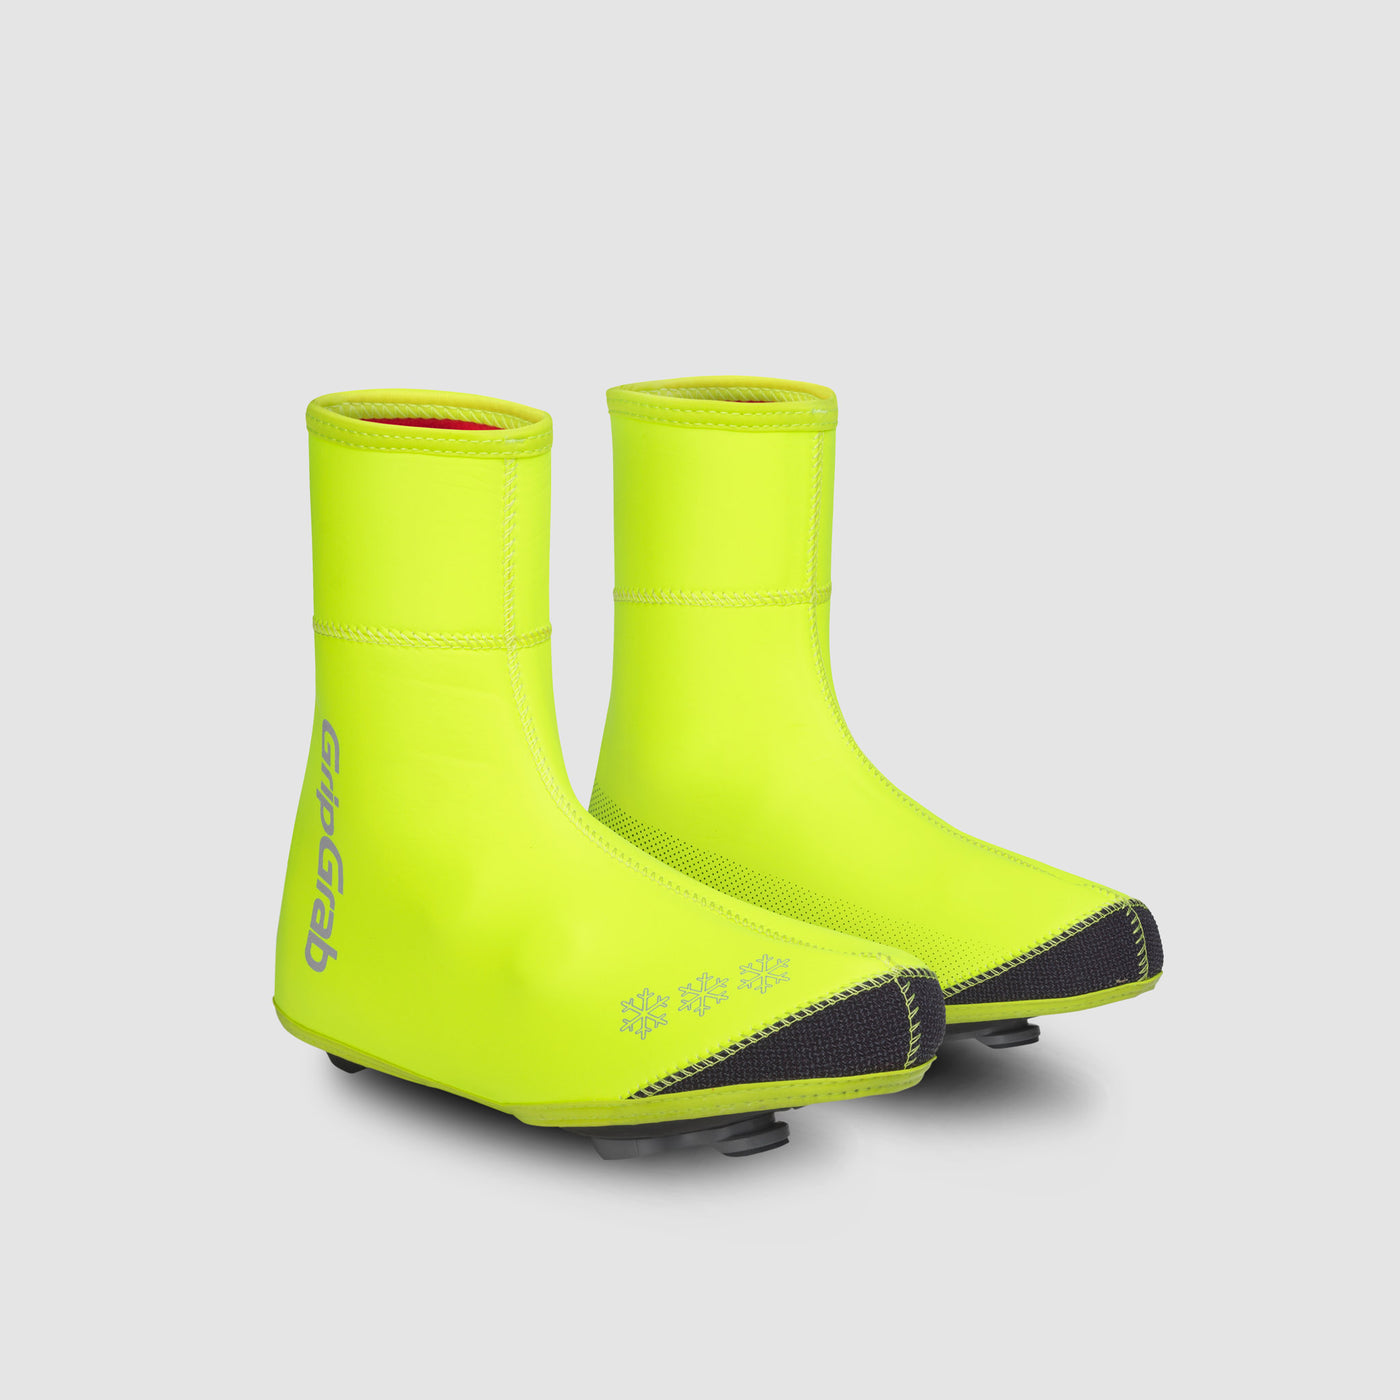 overshoes for trainers